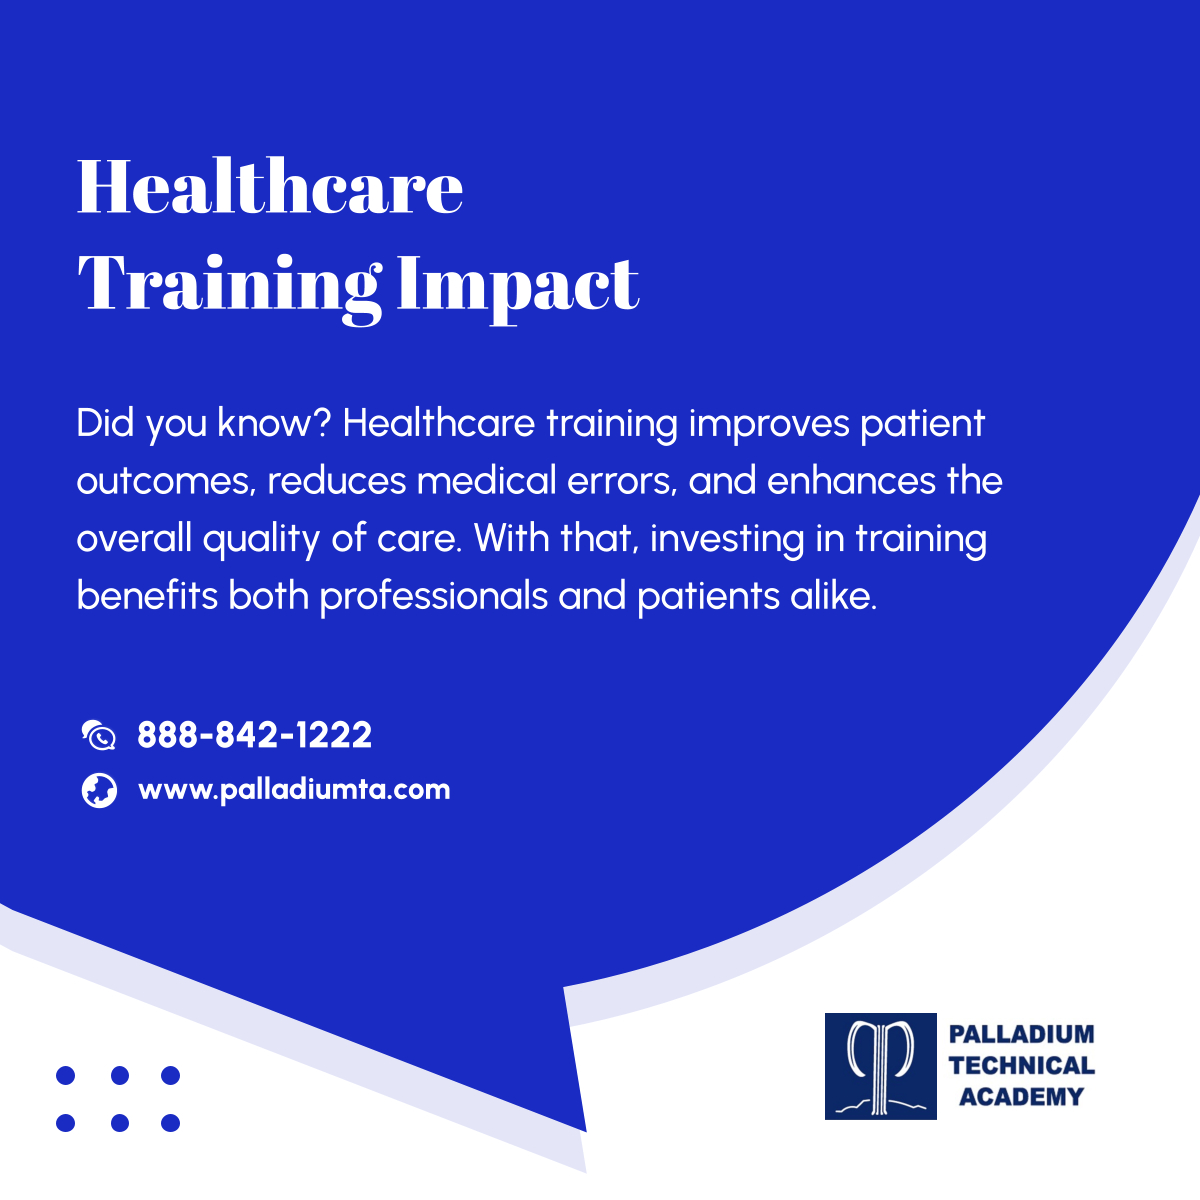 Discover the transformative power of healthcare training. From improving patient outcomes to elevating the quality of care, investing in education yields invaluable benefits for all. 

#HealthcareTraining #PatientOutcomes #QualityCare